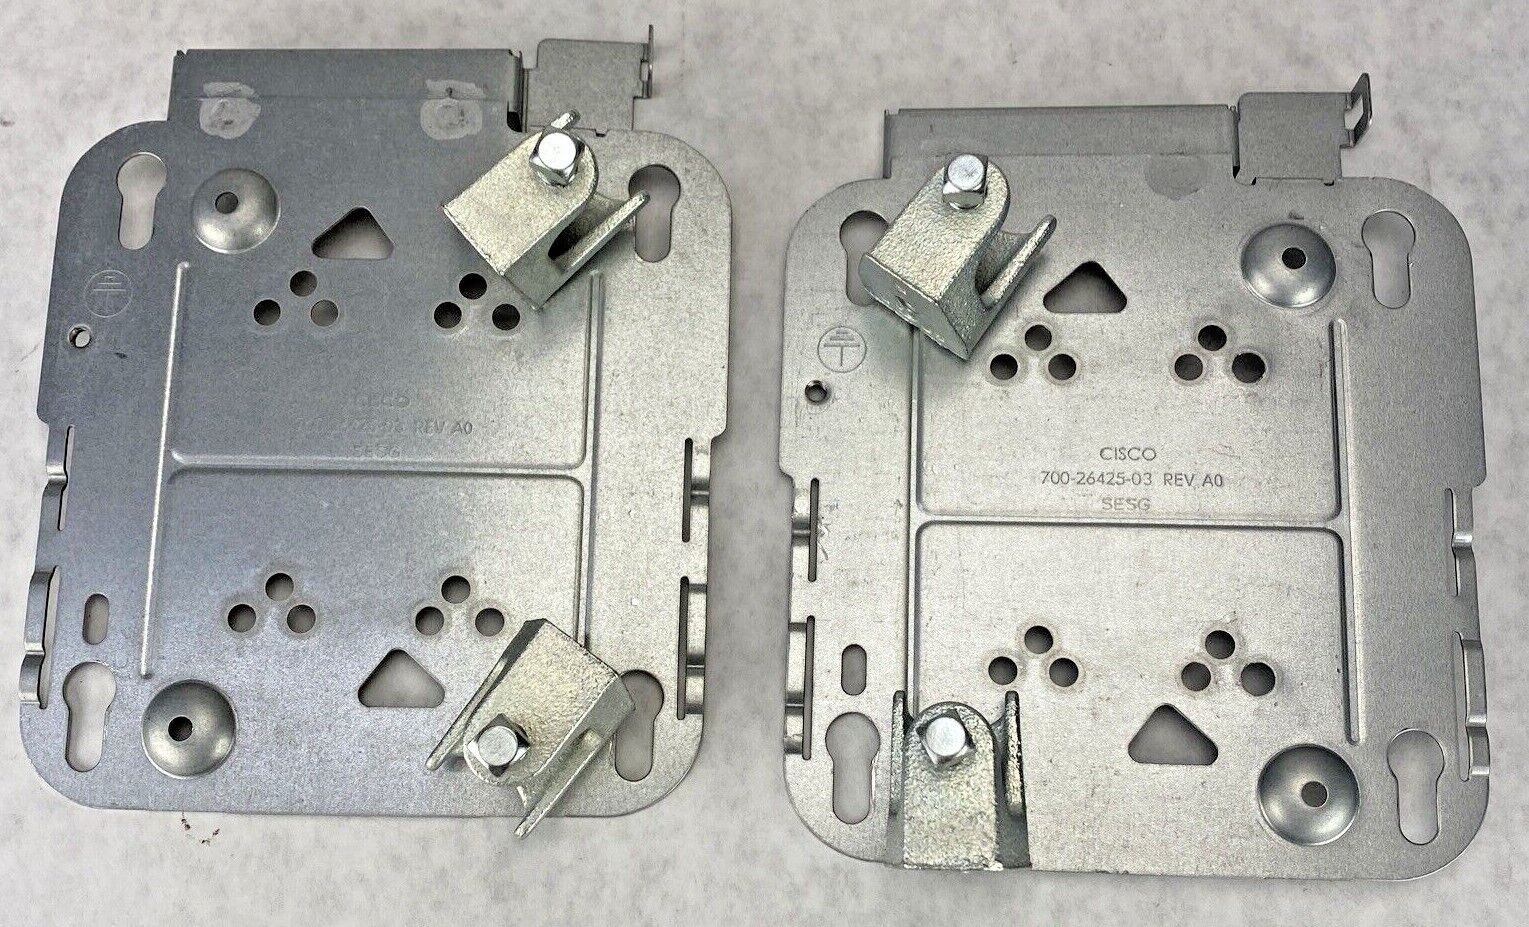 Lot of 2 Cisco 700-26425-03 Access Point Mounting Bracket WITH 4 CLAMPS